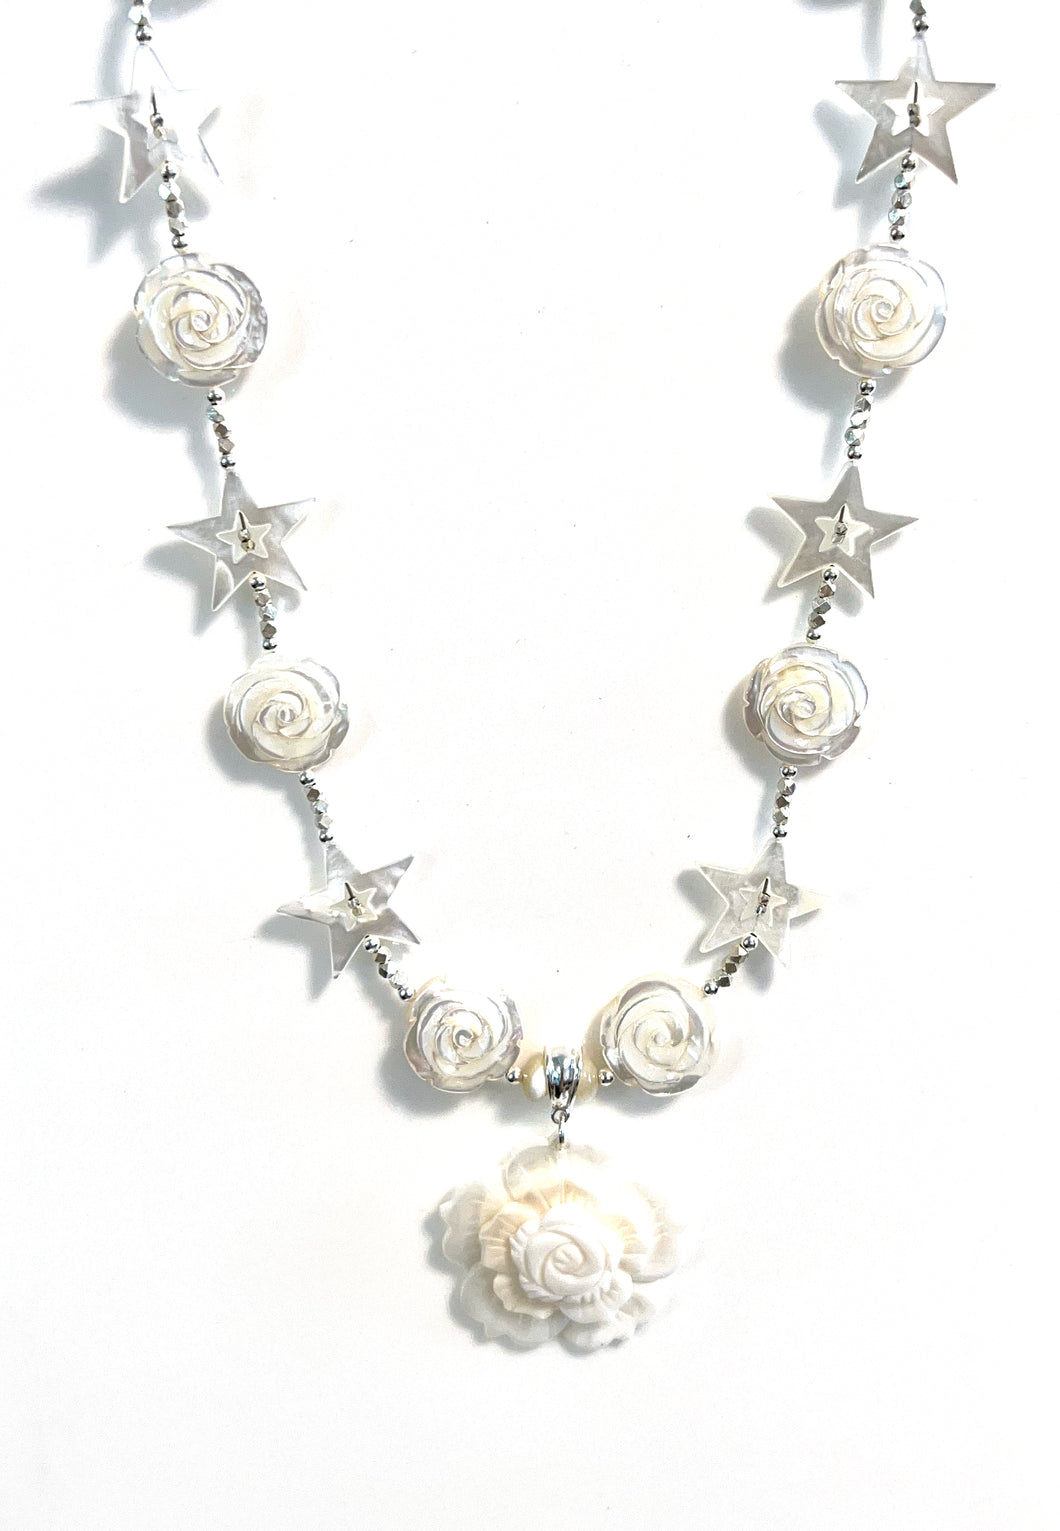 Australian Handmade White Necklace with Mother of Pearl and Sterling Silver